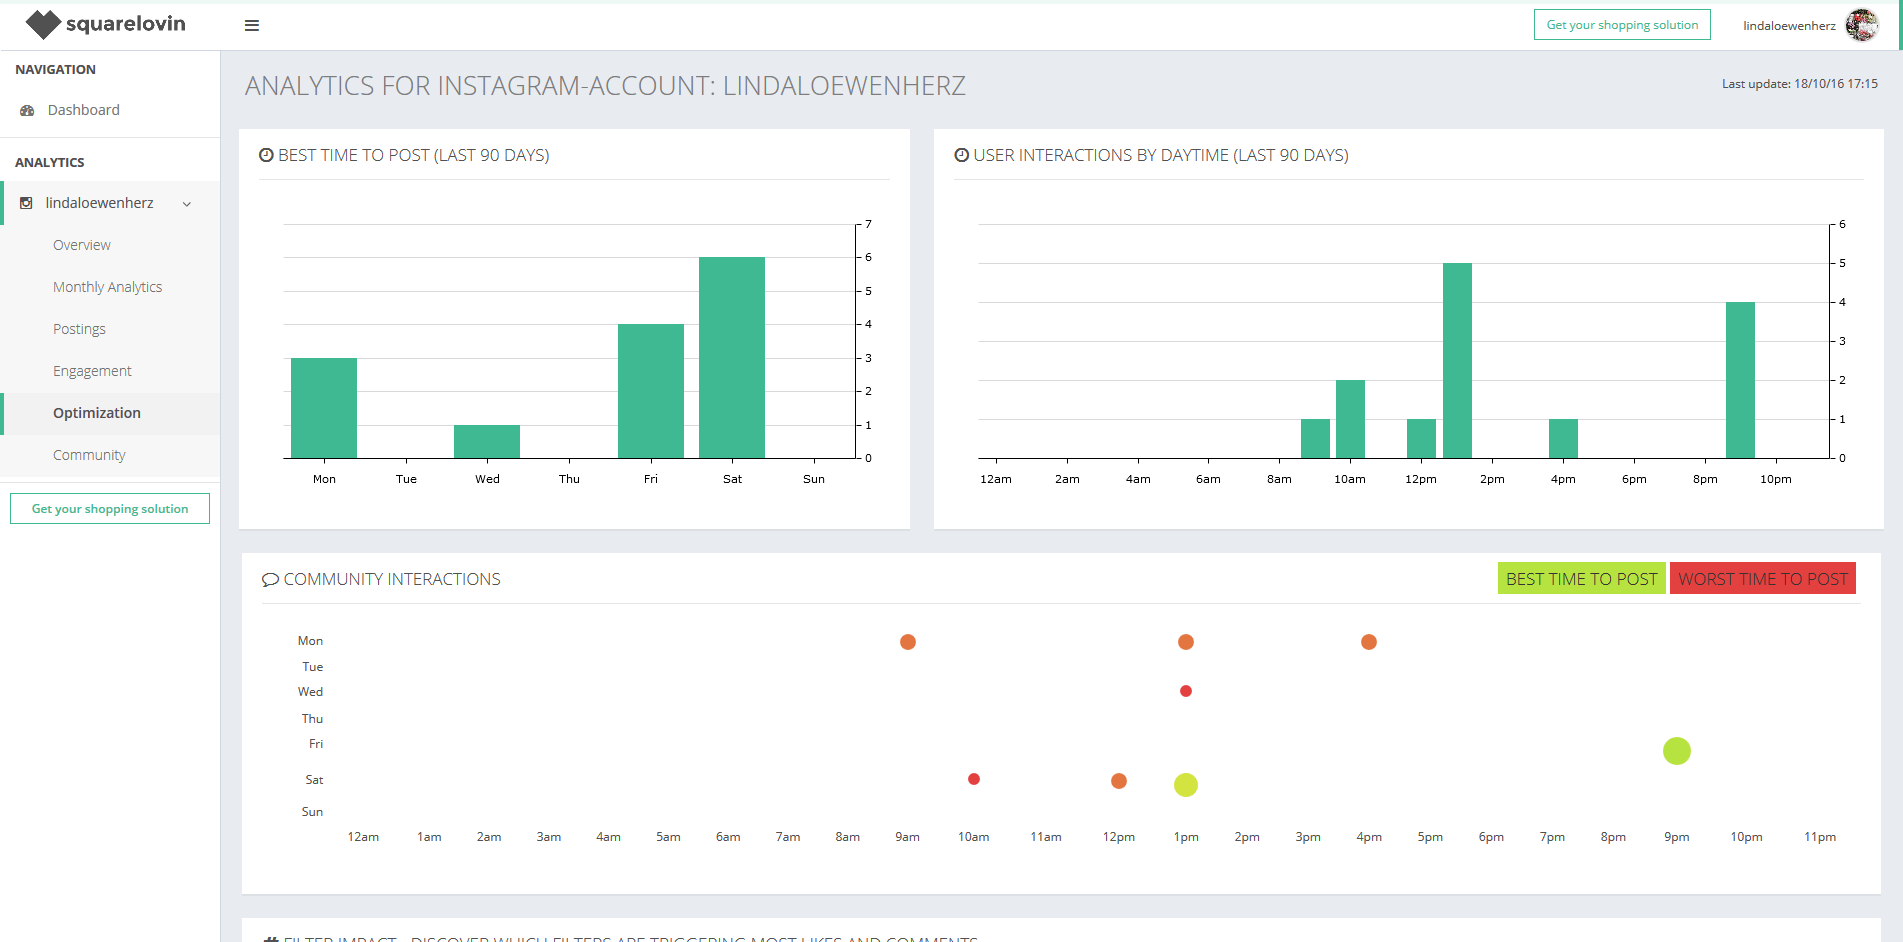 Overview of the analysis results in Squarelovin